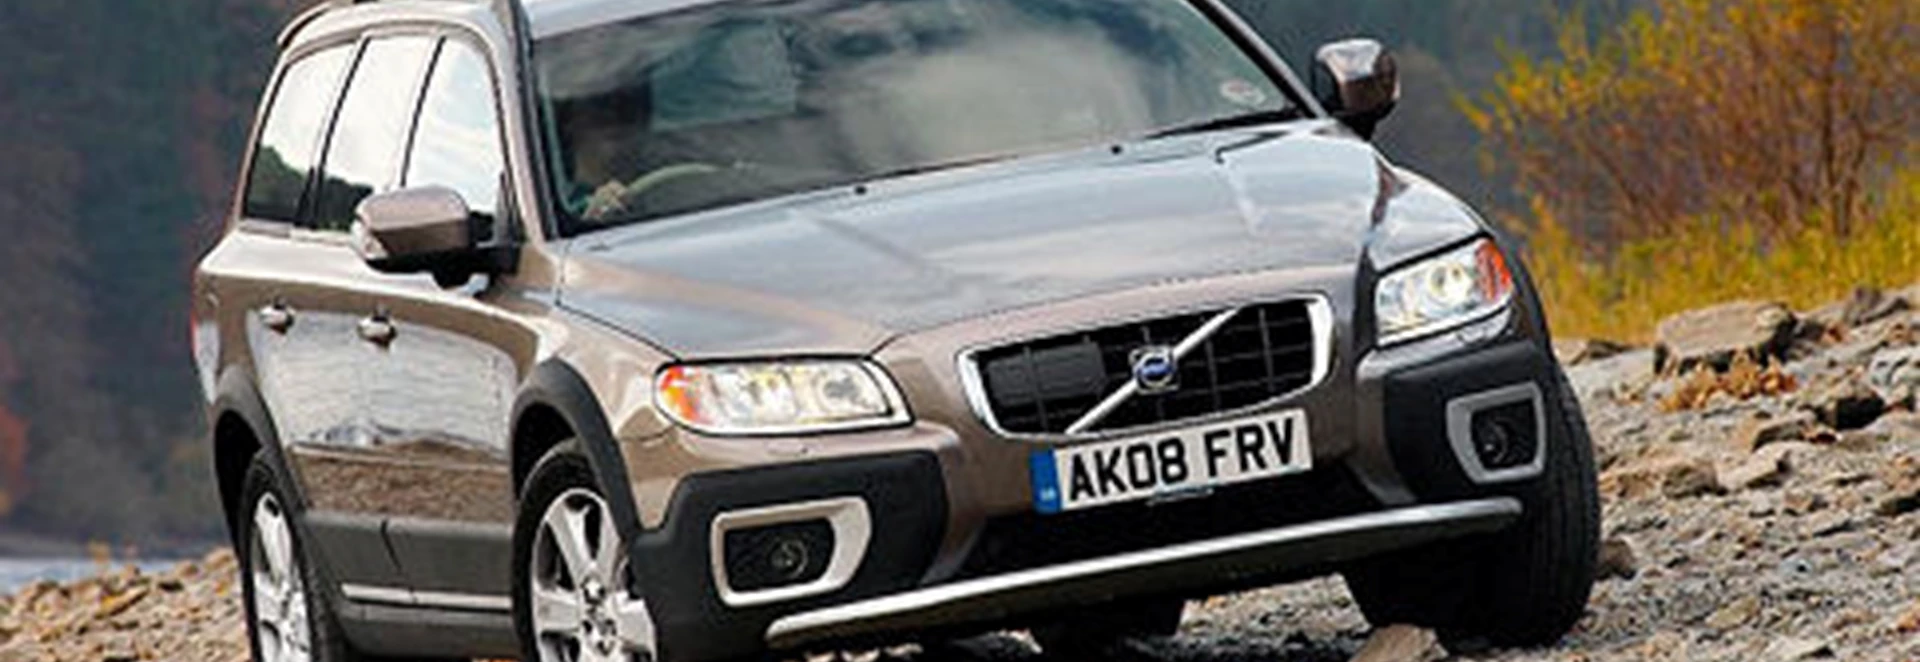 Volvo XC70 D5 SE Geartronic (2008) 